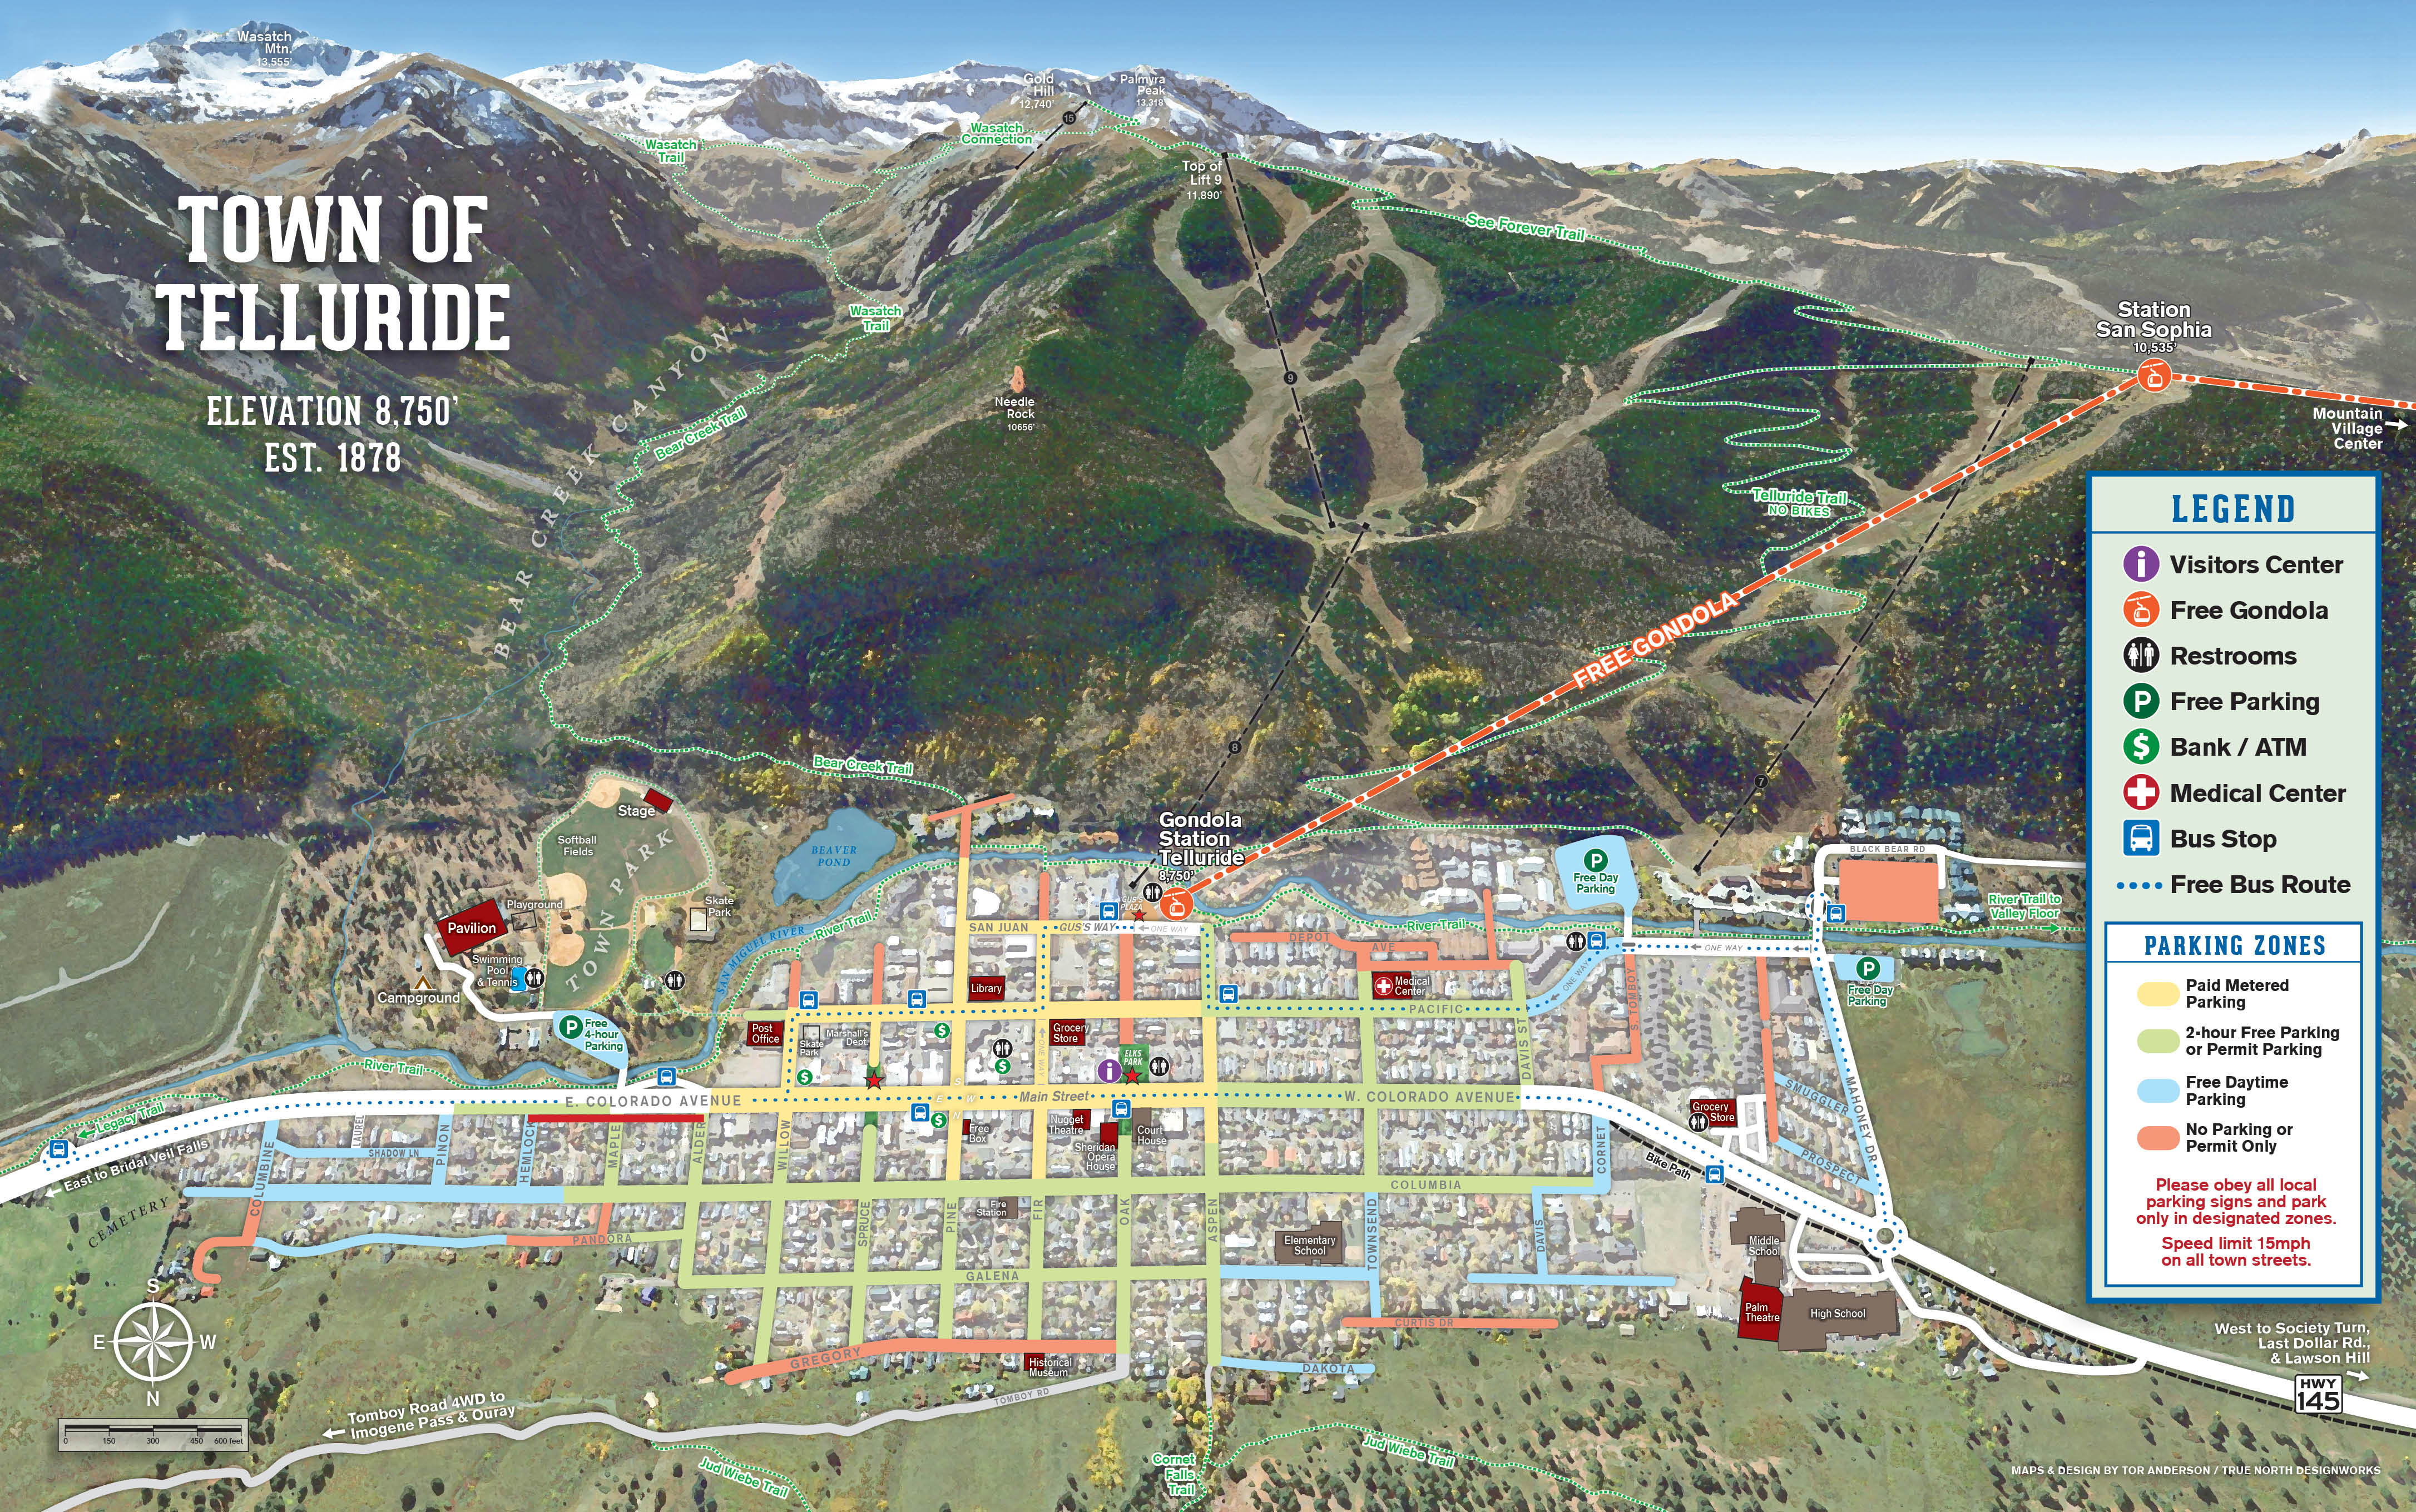 About Telluride